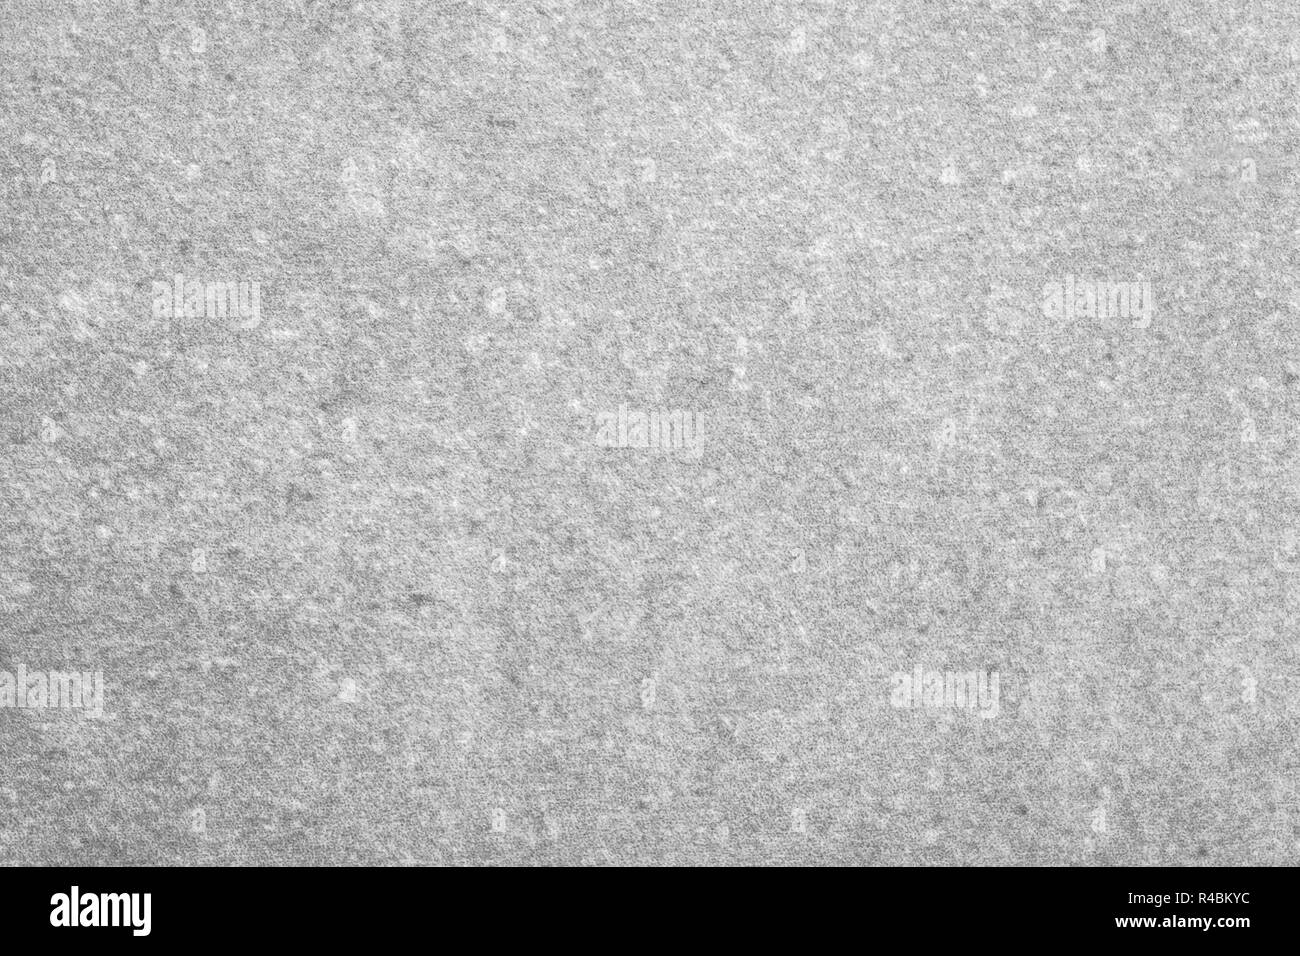 Agstract background of grey stone, texture Stock Photo